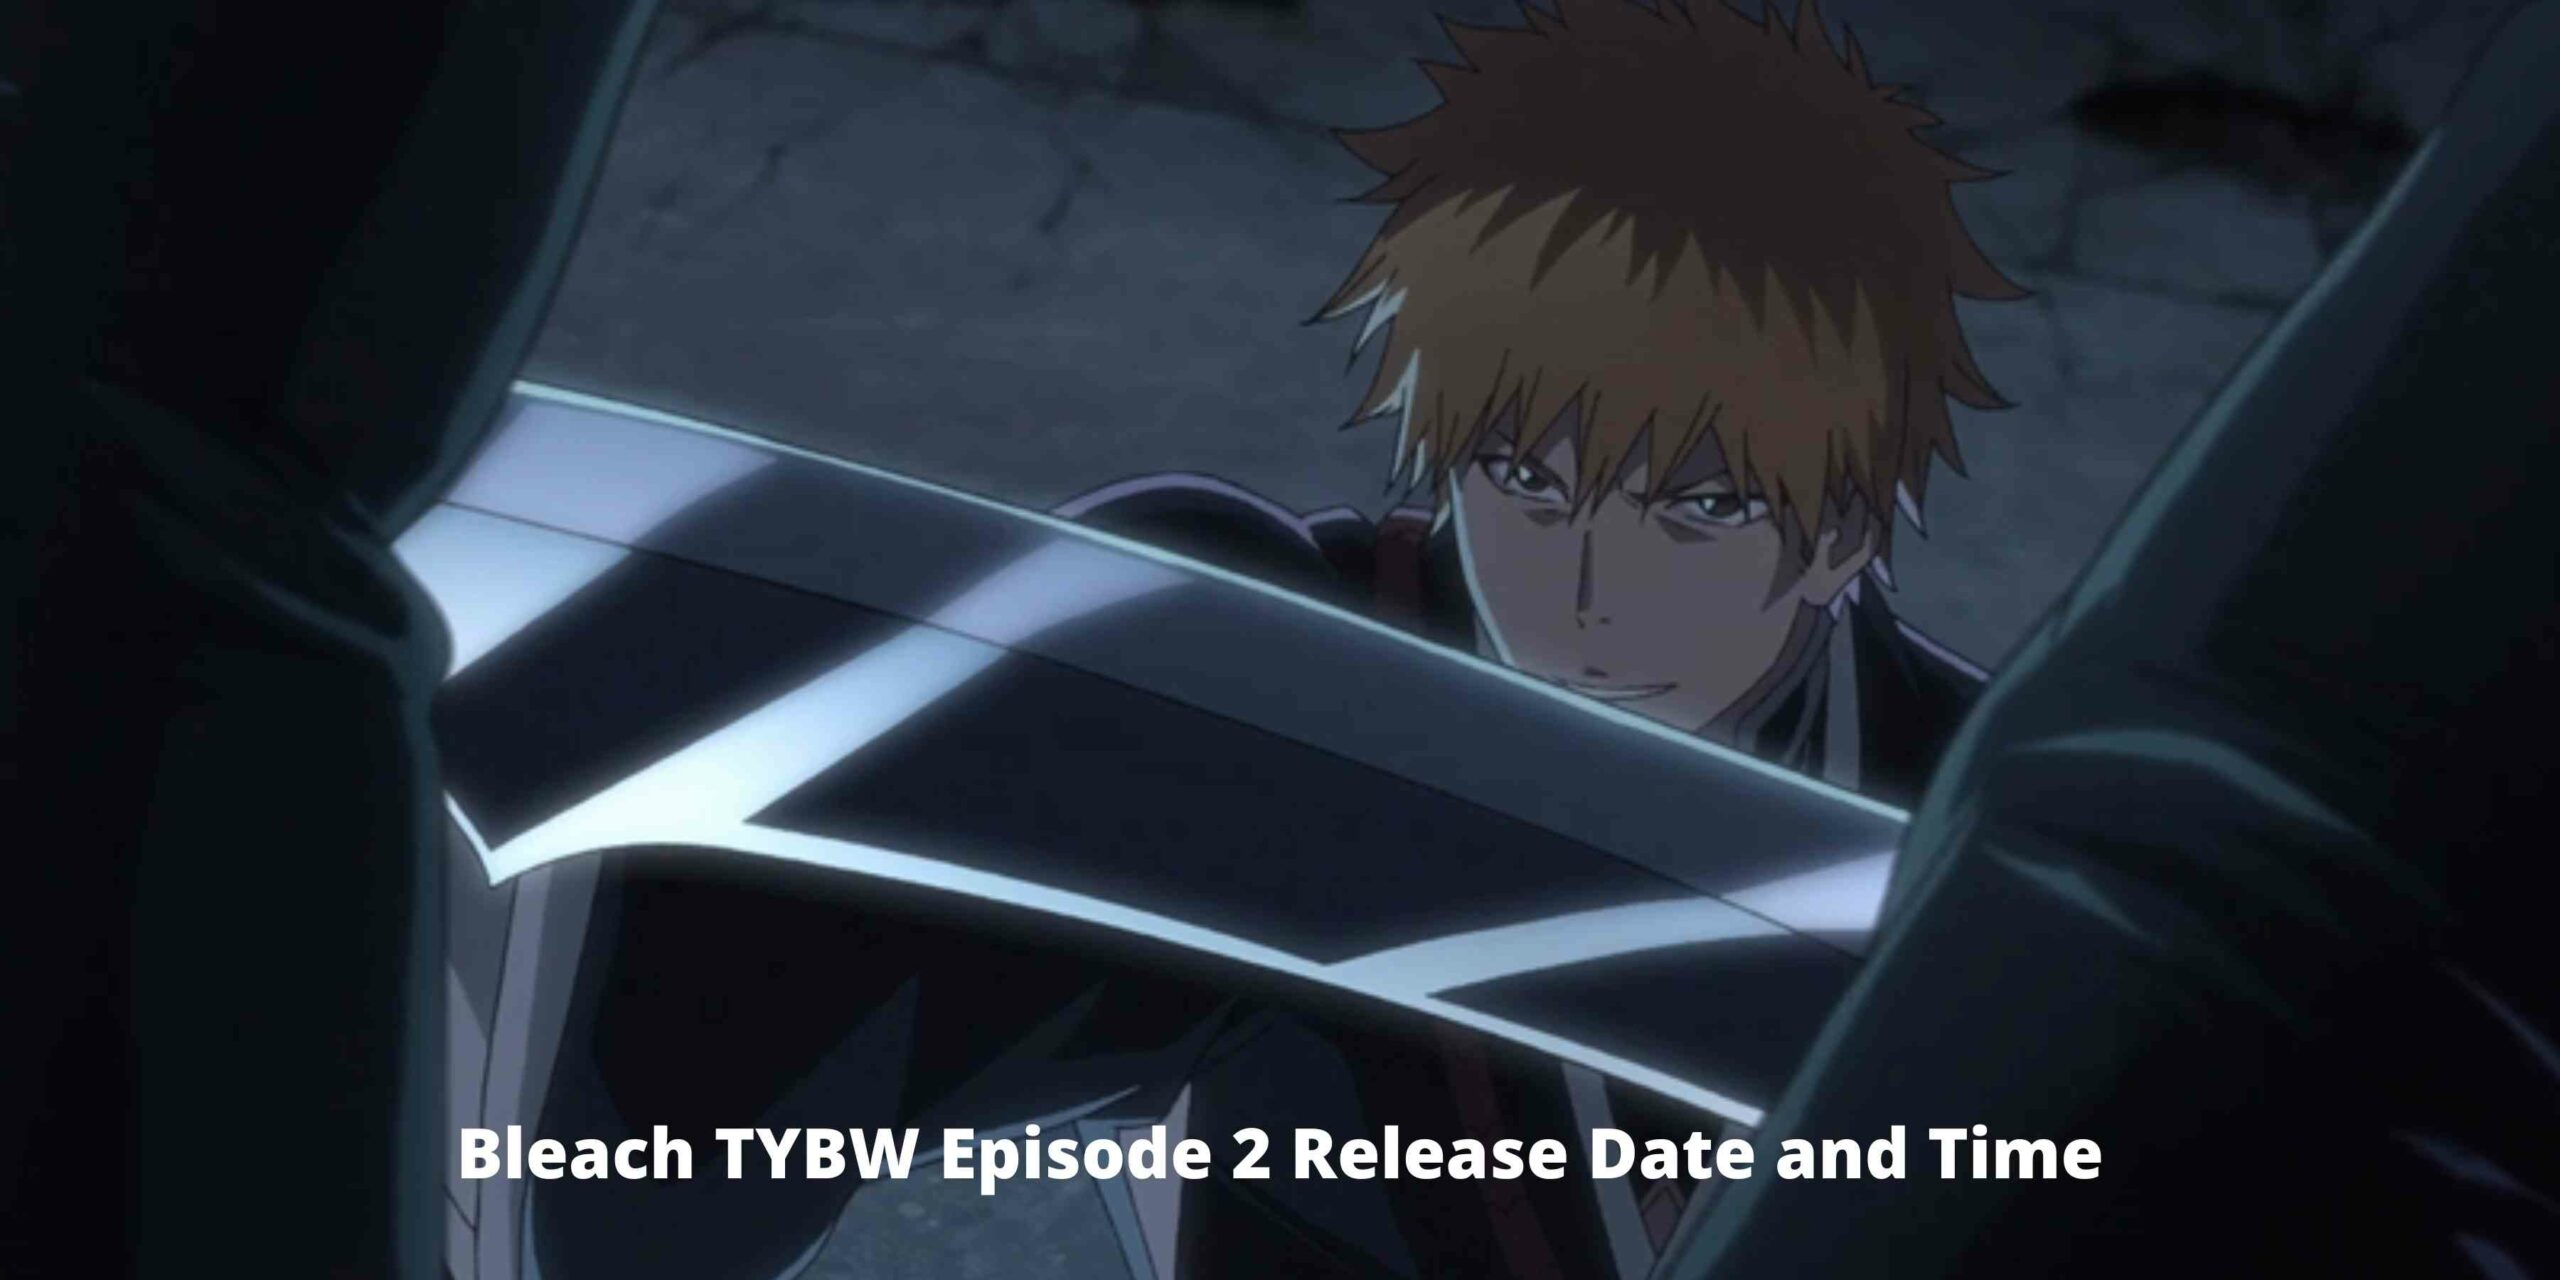 Bleach TYBW Episode 2 Release Date and Time